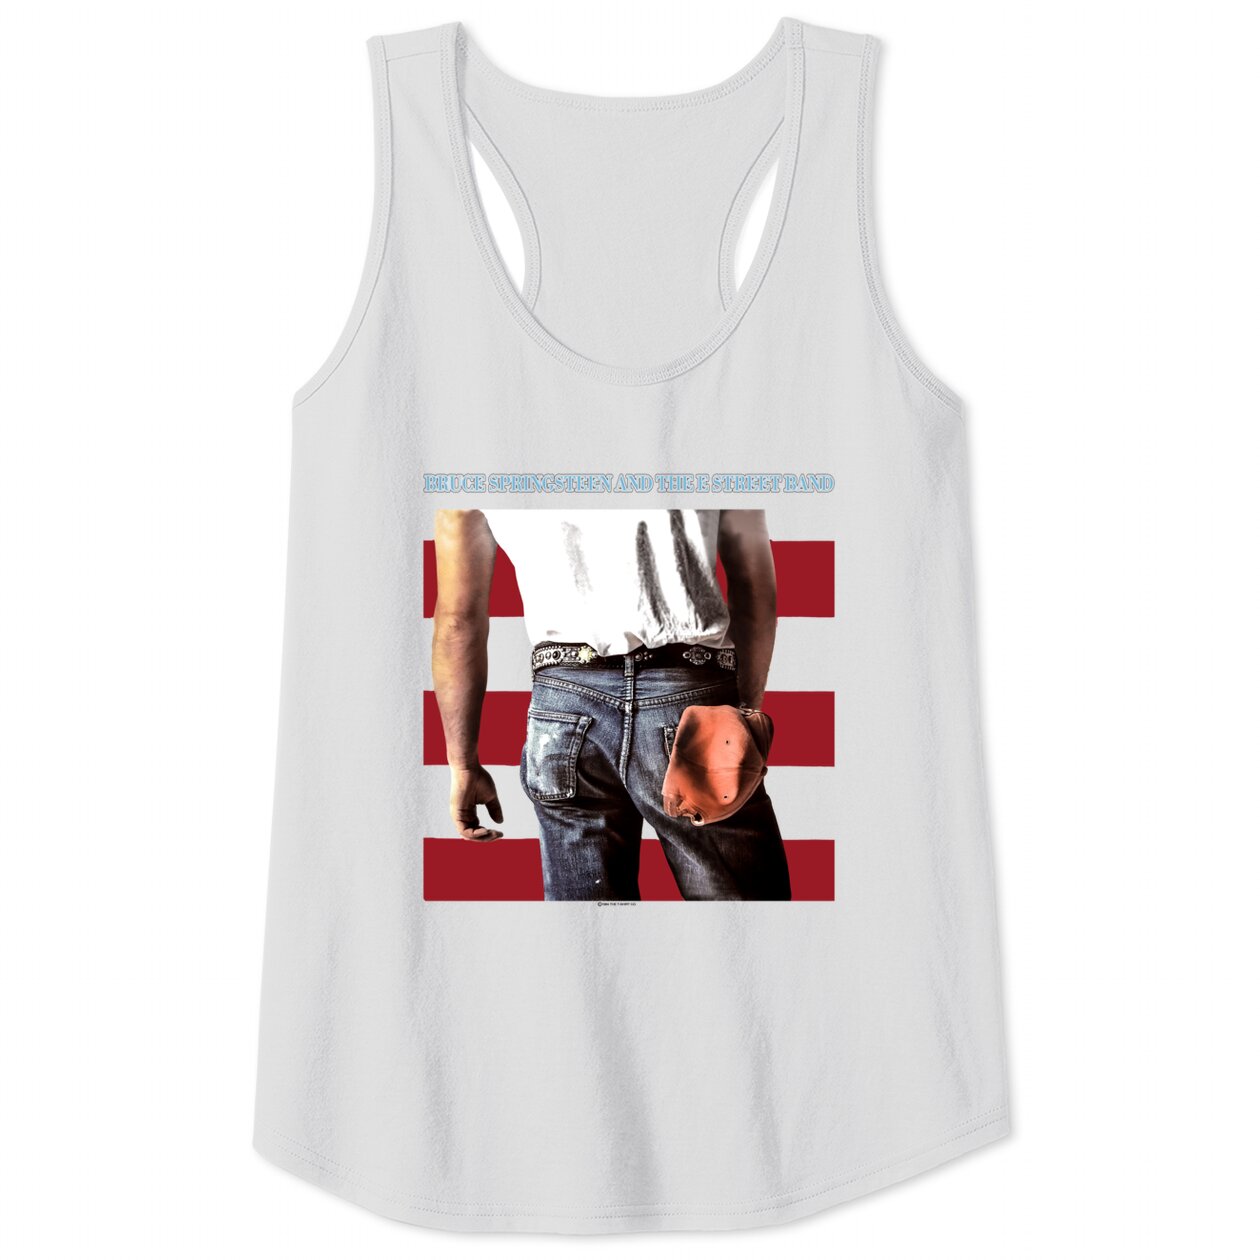 Vintage Bruce Springsteen White Graphic Tank Tops